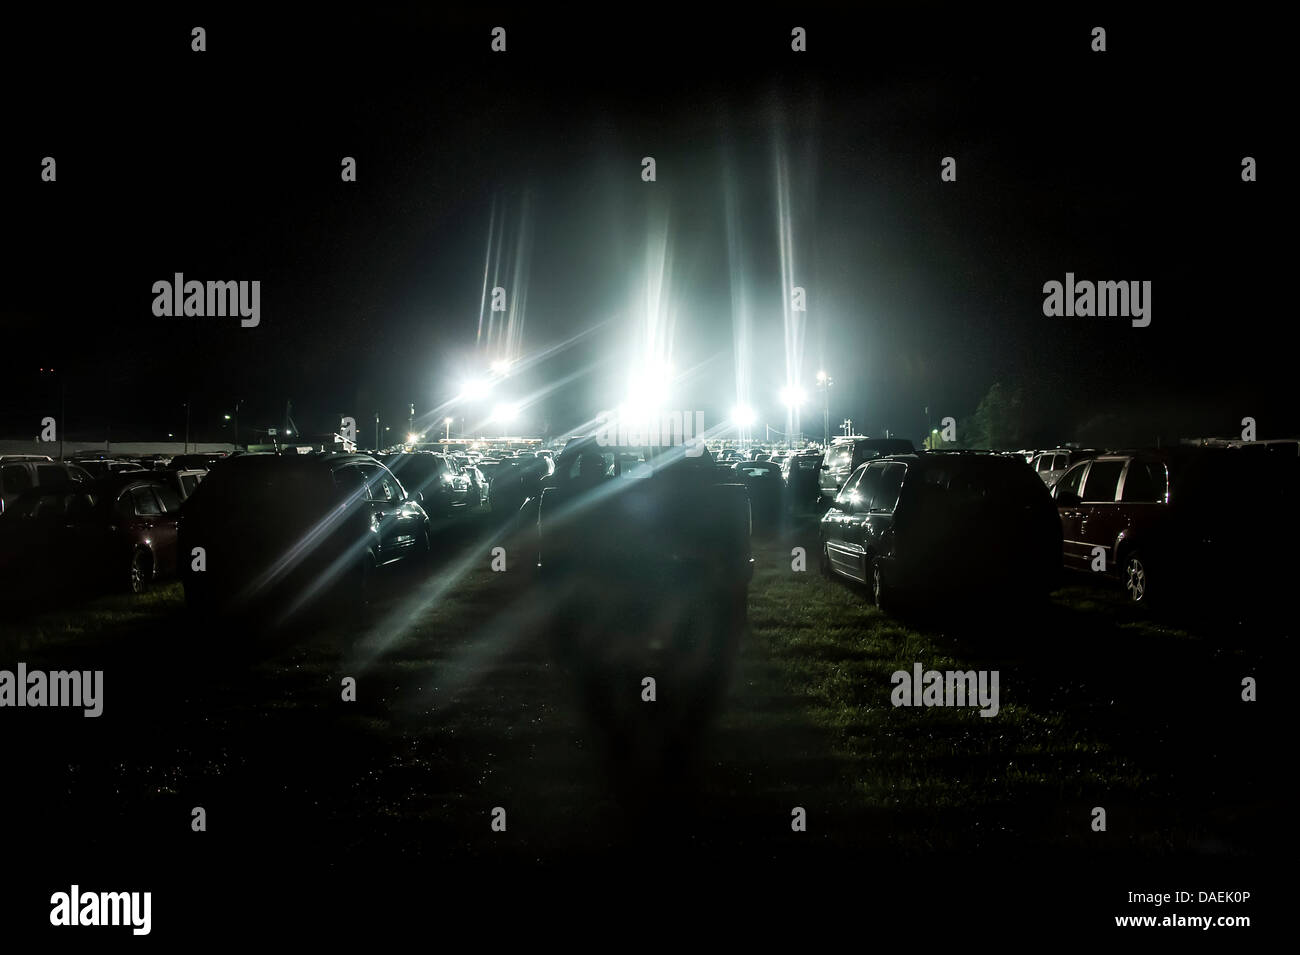 Cars parked in a grass field for evening rodeo event, Cowtown, New Jersey, USA Stock Photo